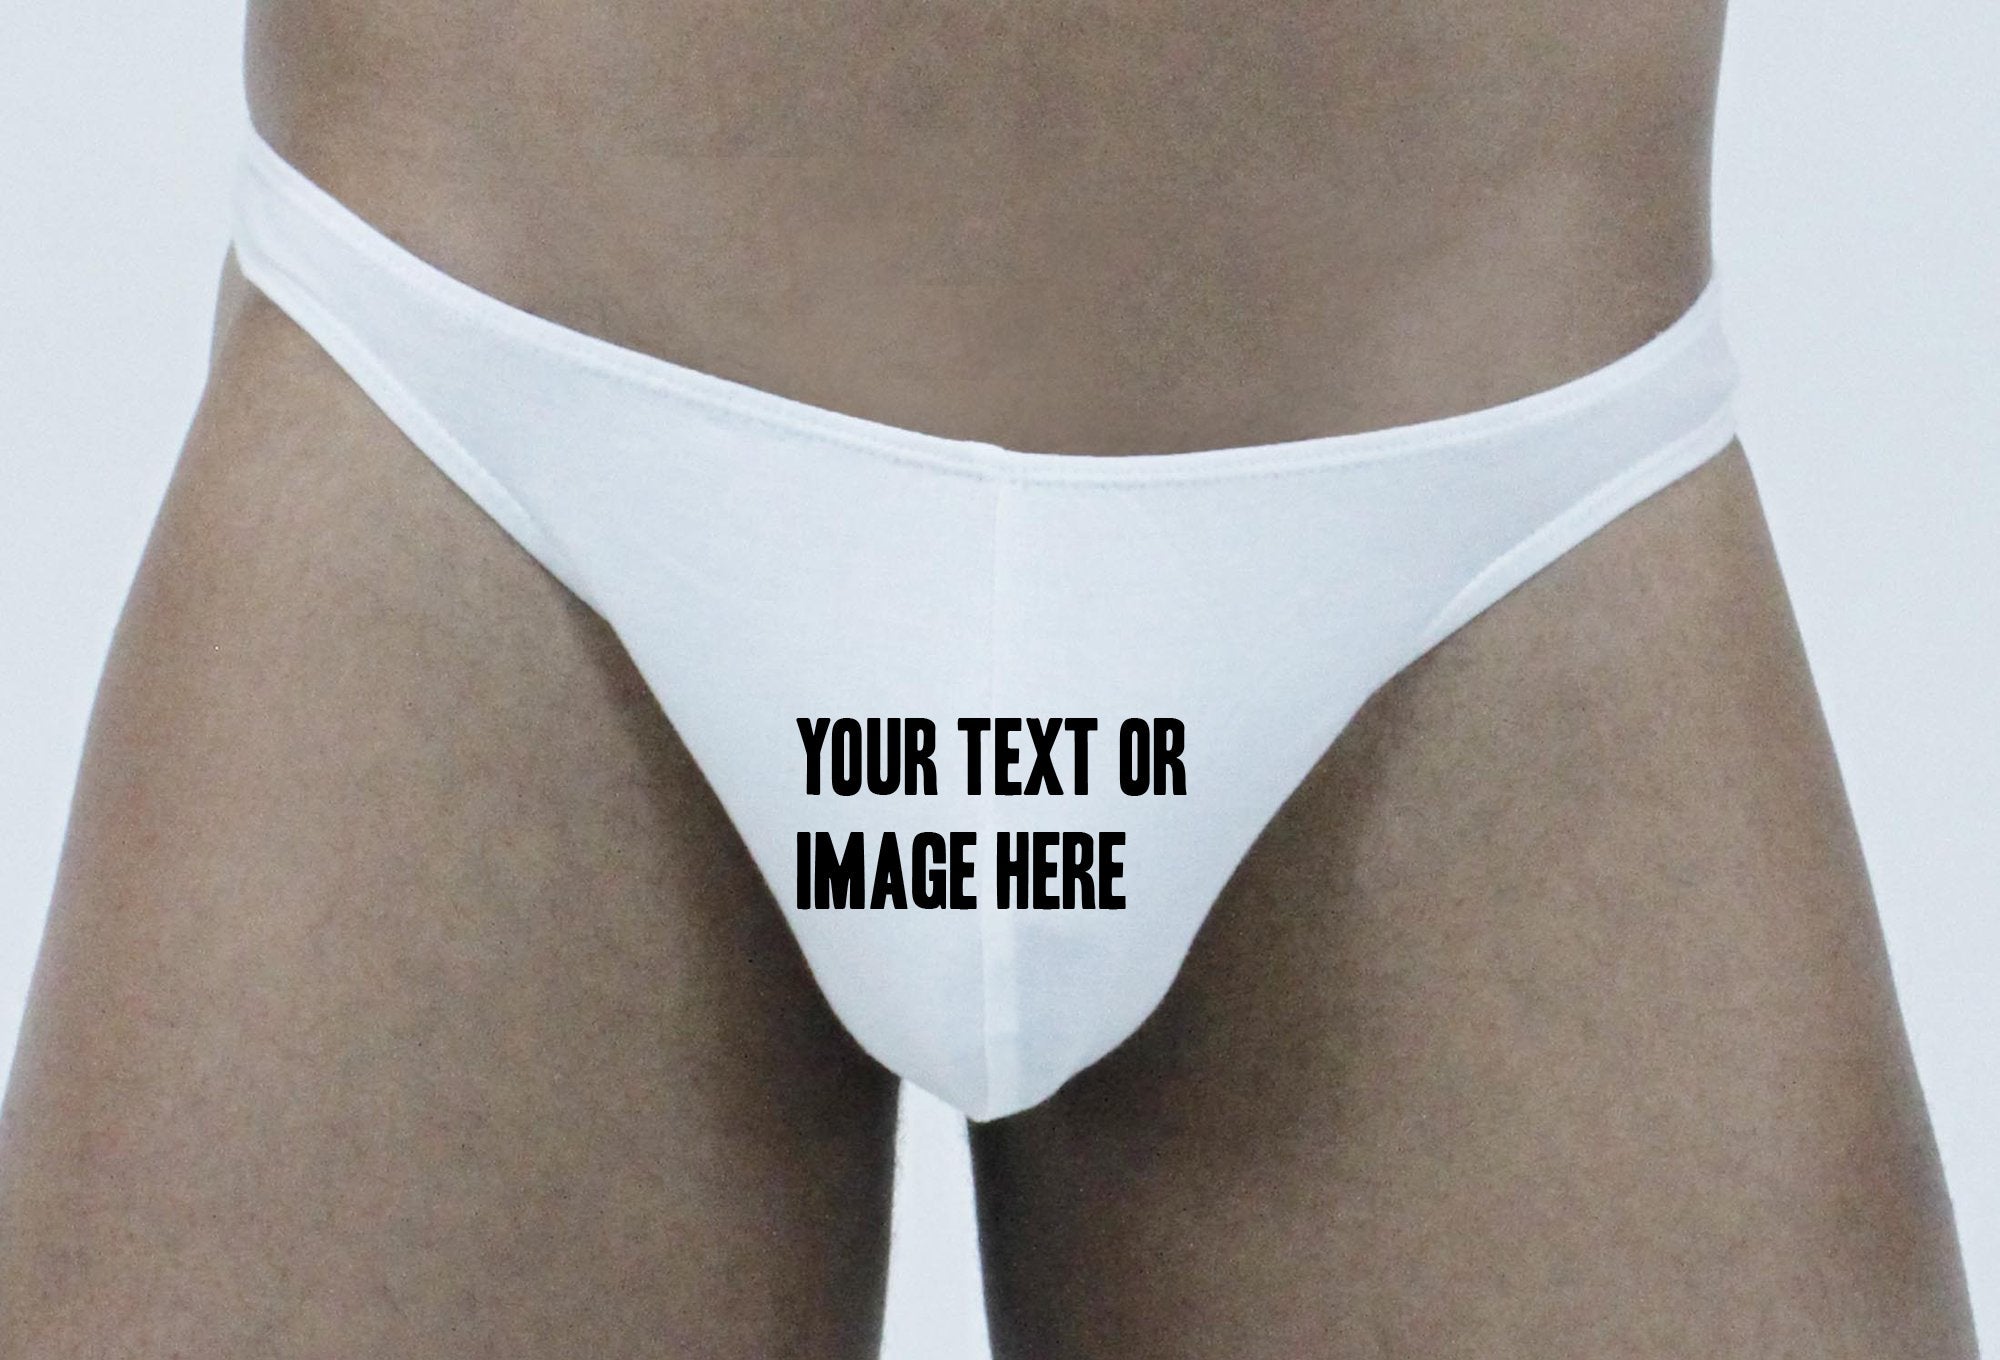 Customized Thong Front & Back, Customized Panties, Custom Thong, Sexy  Panties, Customized Lingerie, Personalized Thongs, Funny Thong -  Canada